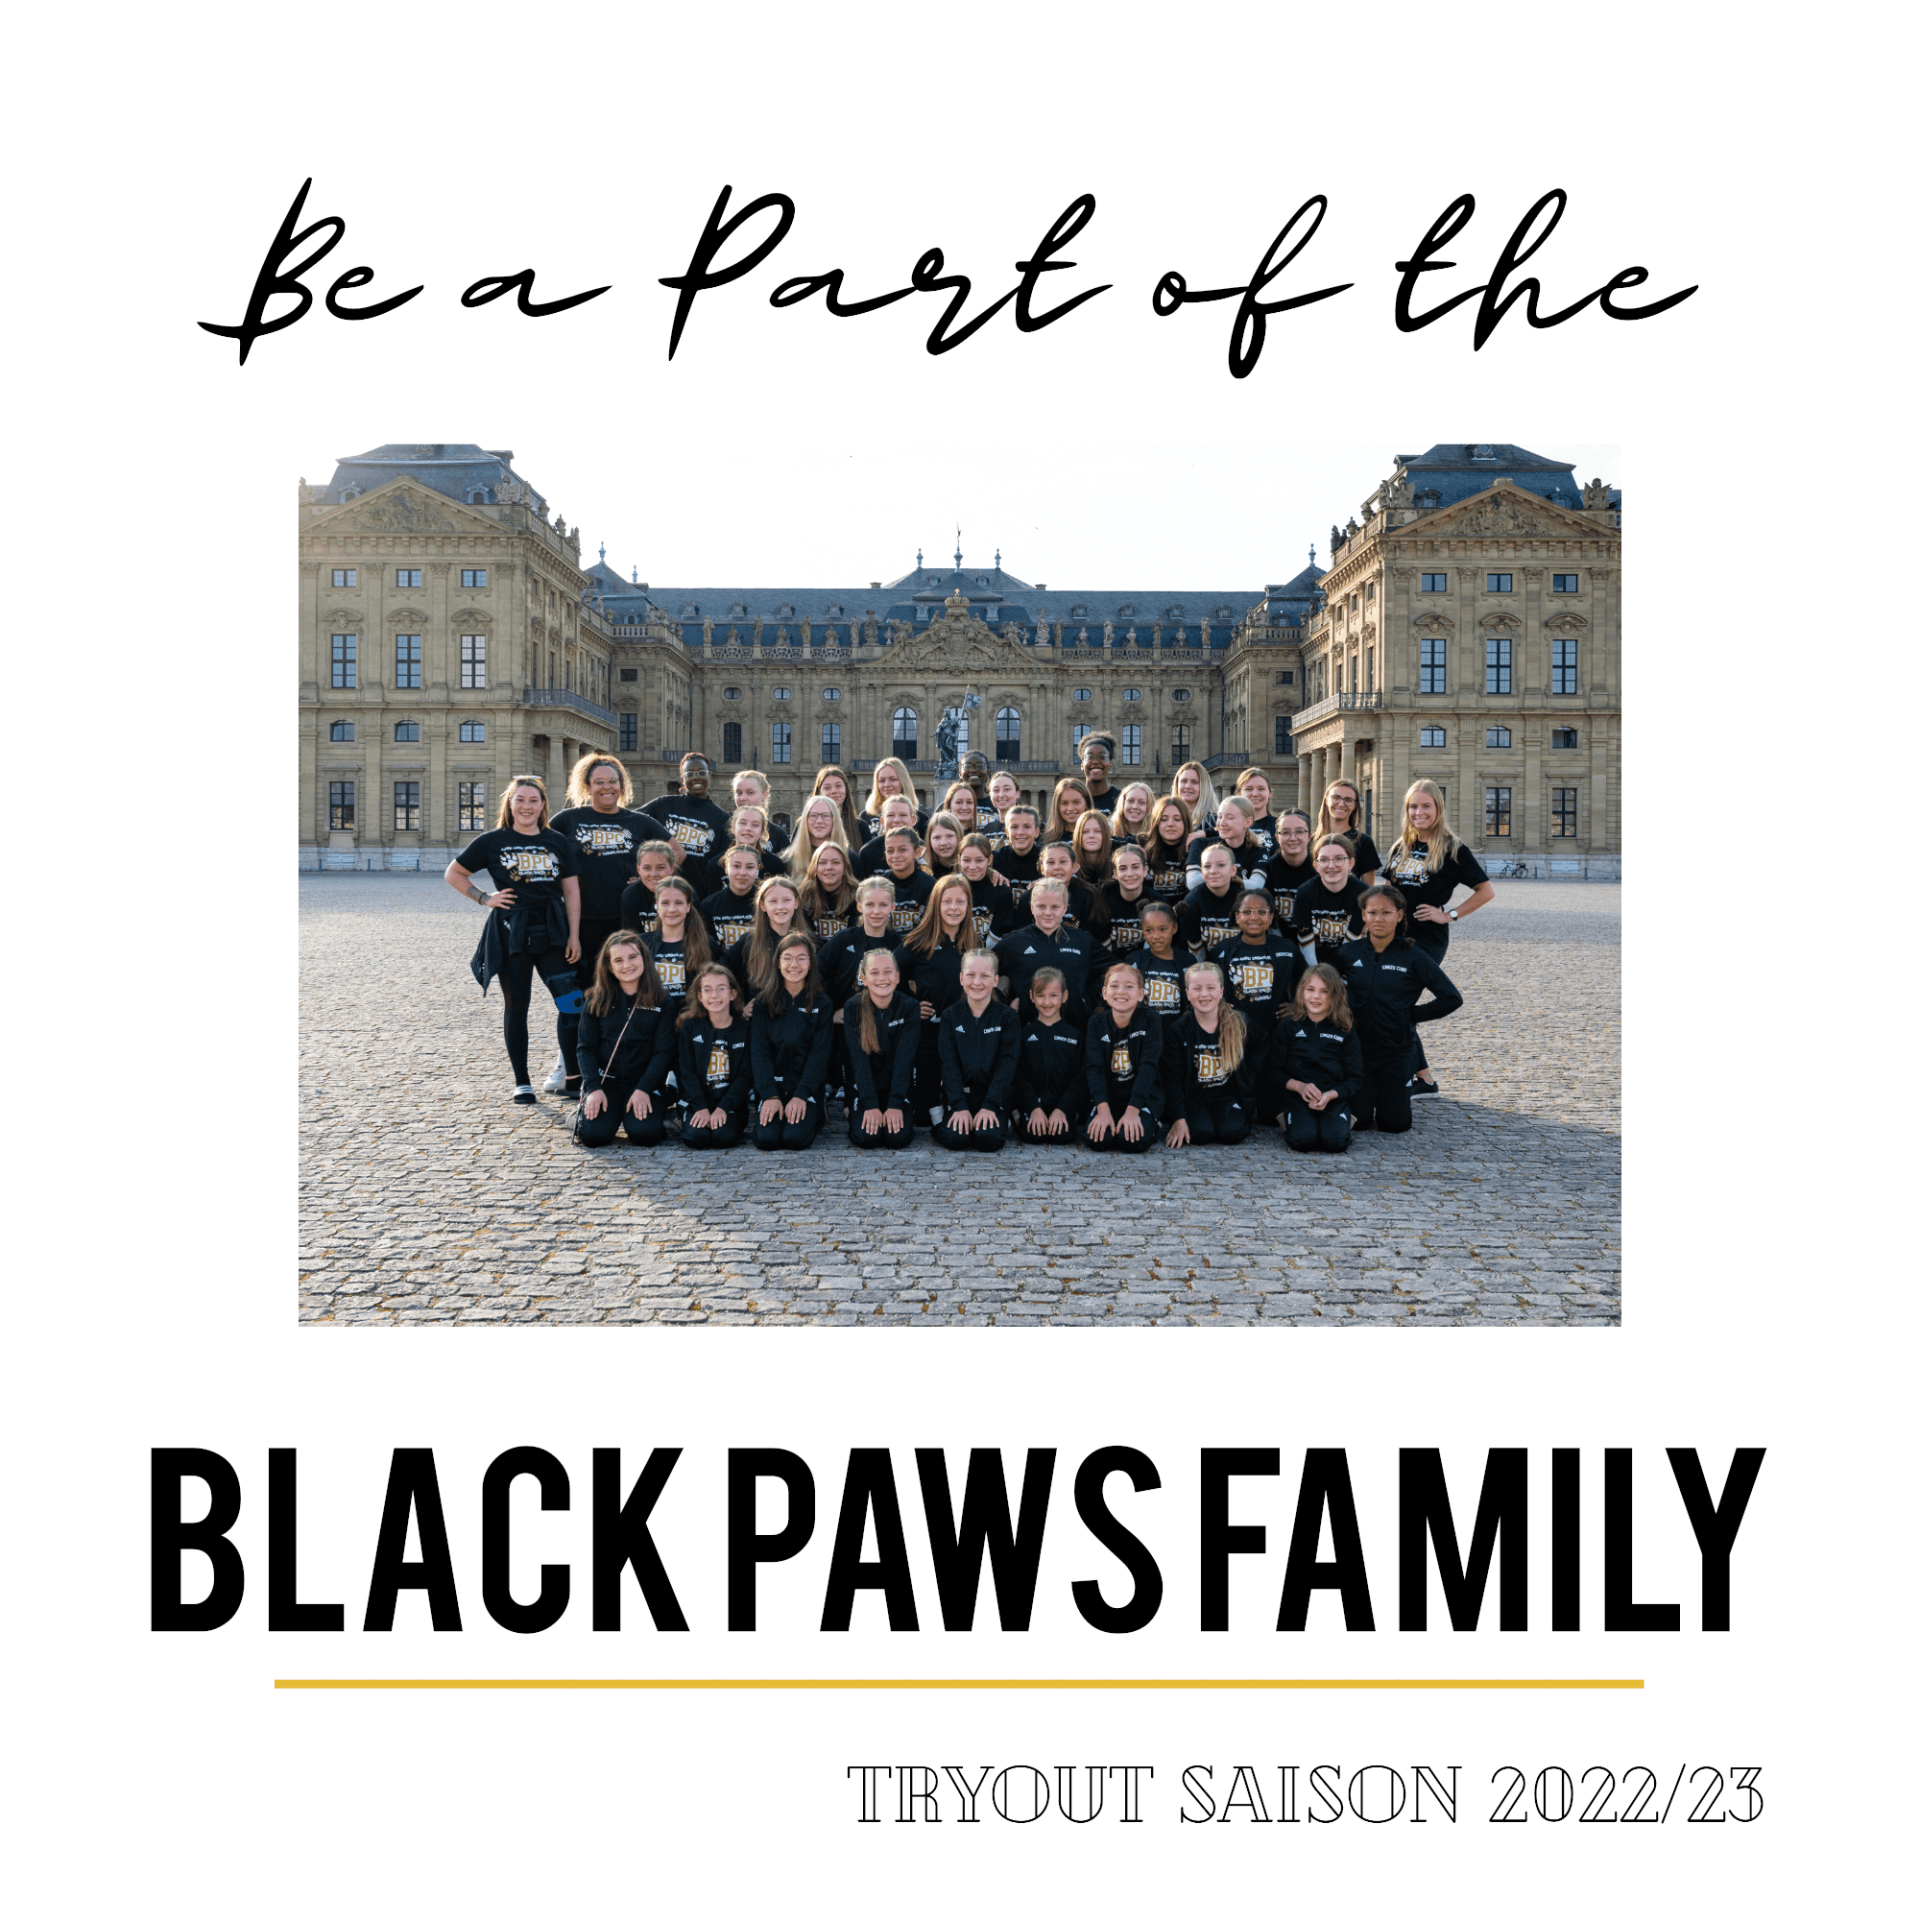 BE A PART OF THE BLACK PAWS FAMILY